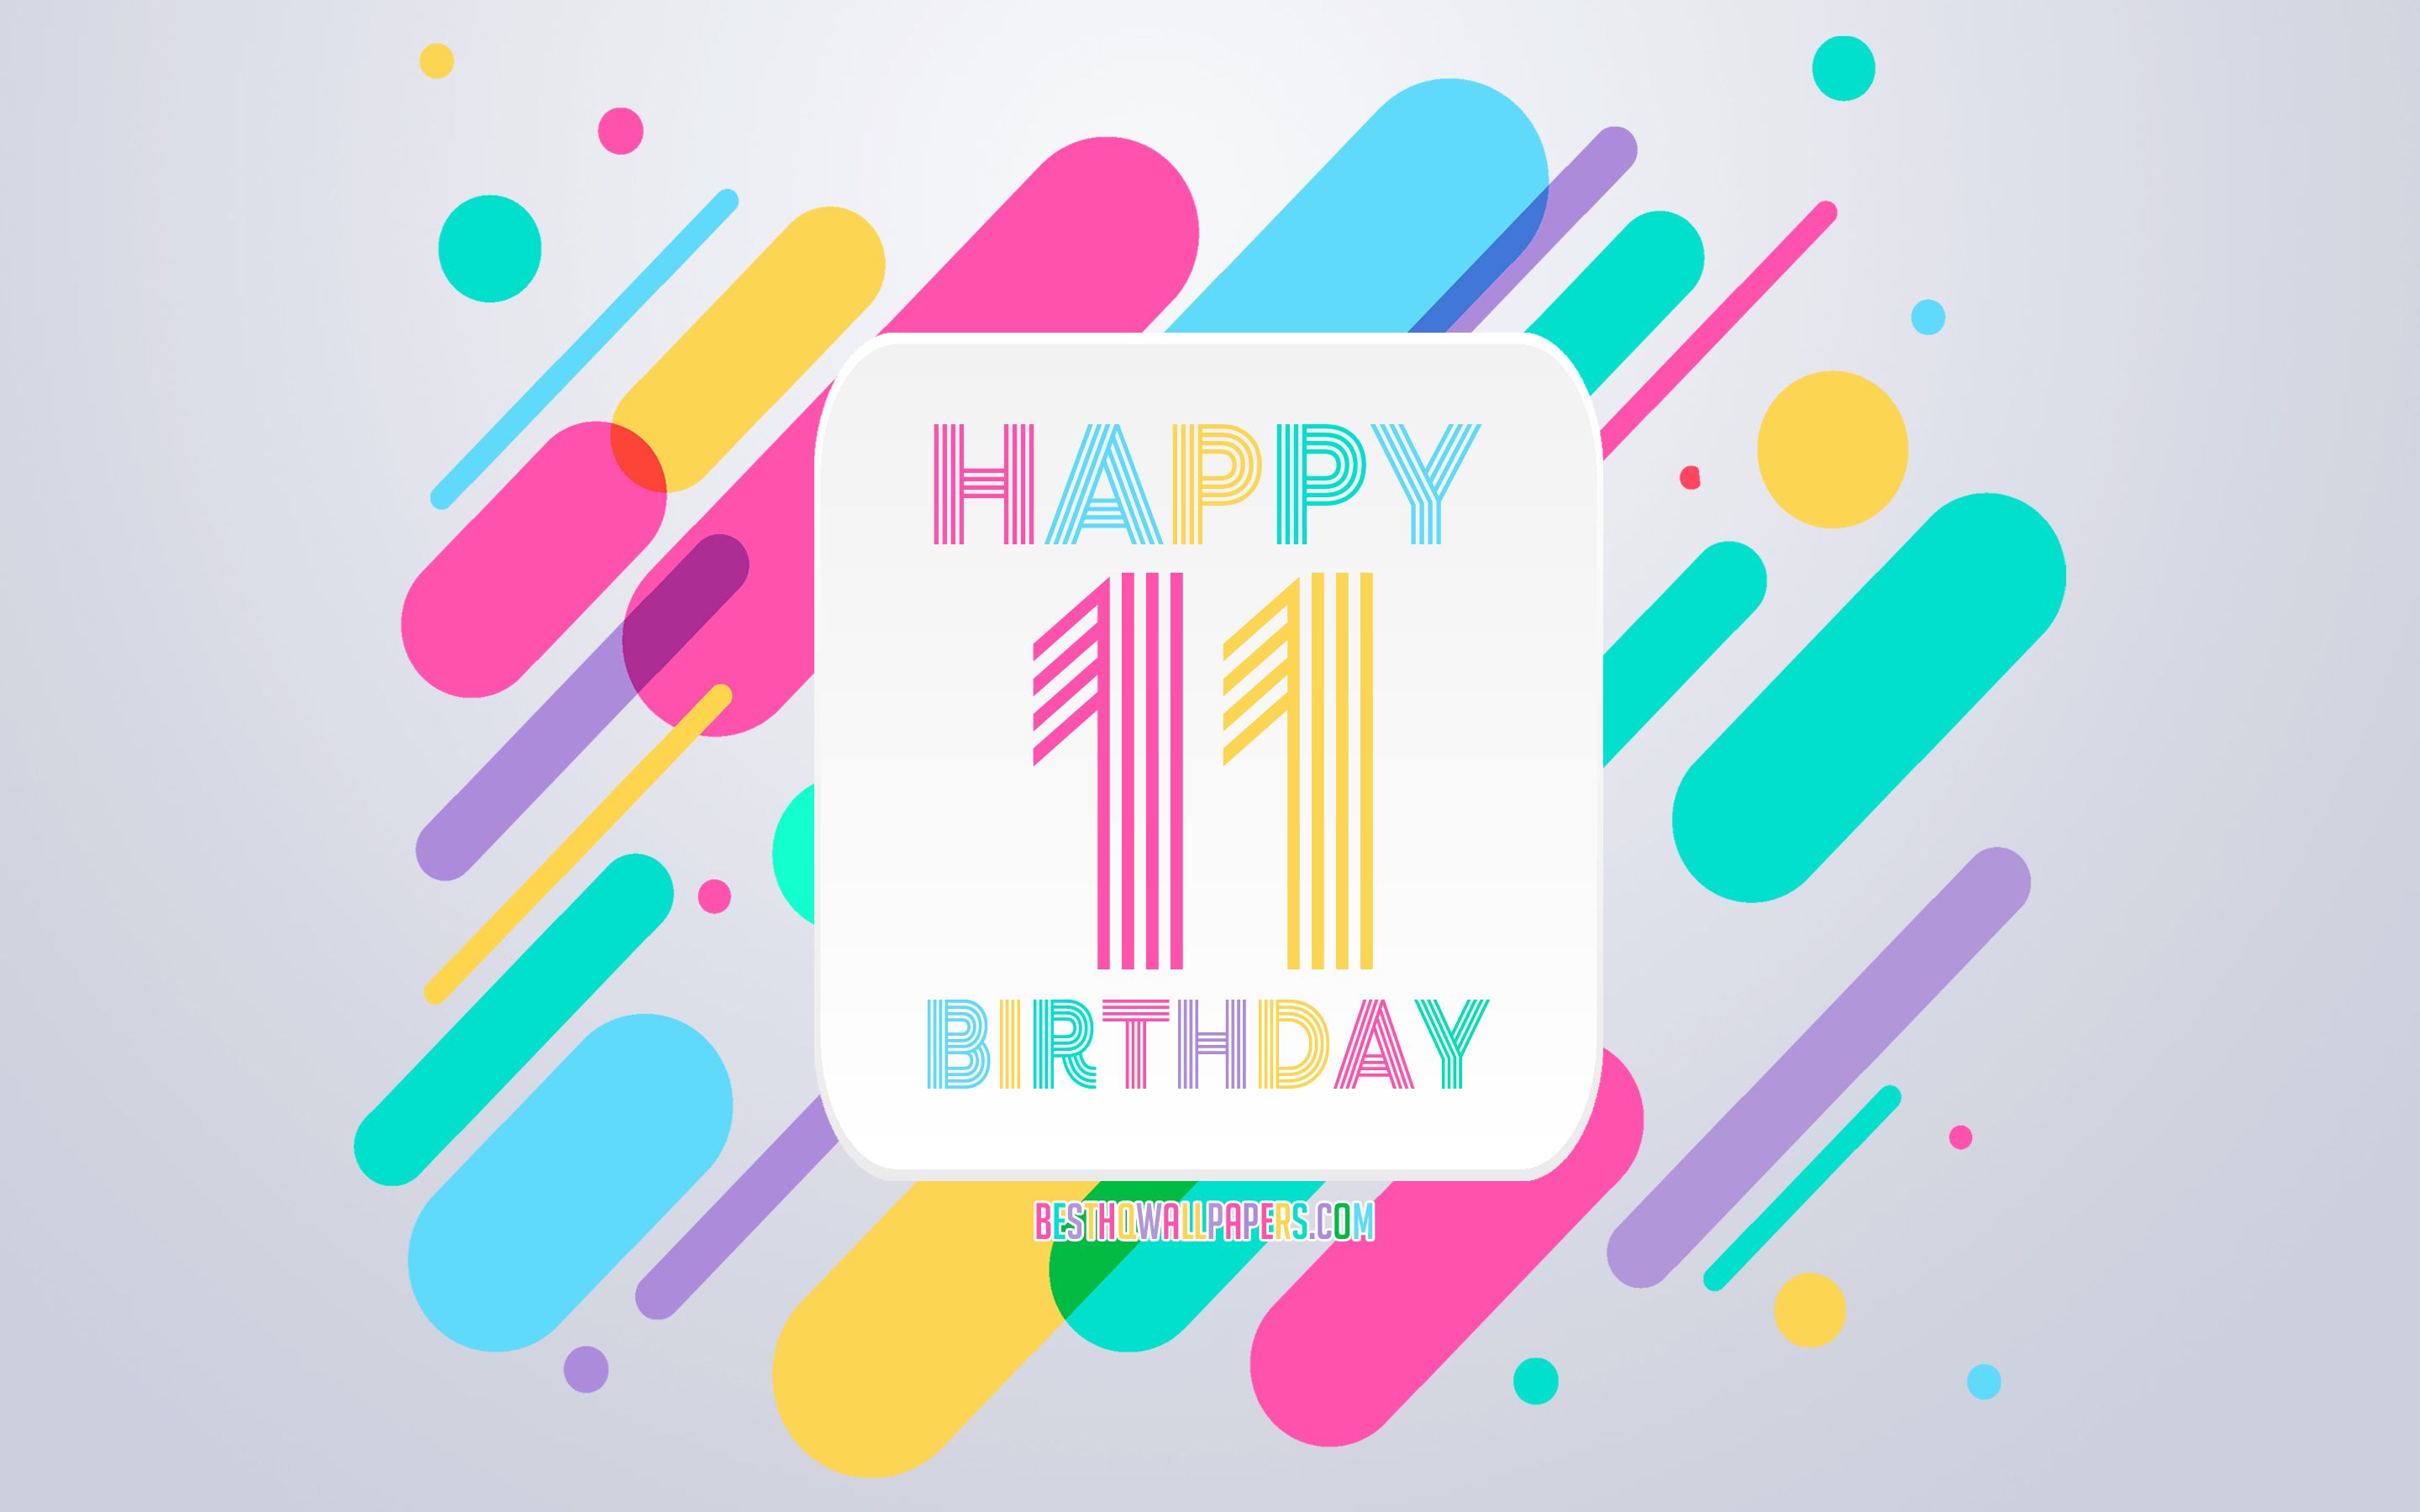 Download wallpaper Happy 11 Years Birthday, Abstract Birthday Background, Happy 11th Birthday, Colorful Abstraction, 11th Happy Birthday, Birthday lines background, 11 Years Birthday, 11 Years Birthday party for desktop with resolution 2880x1800